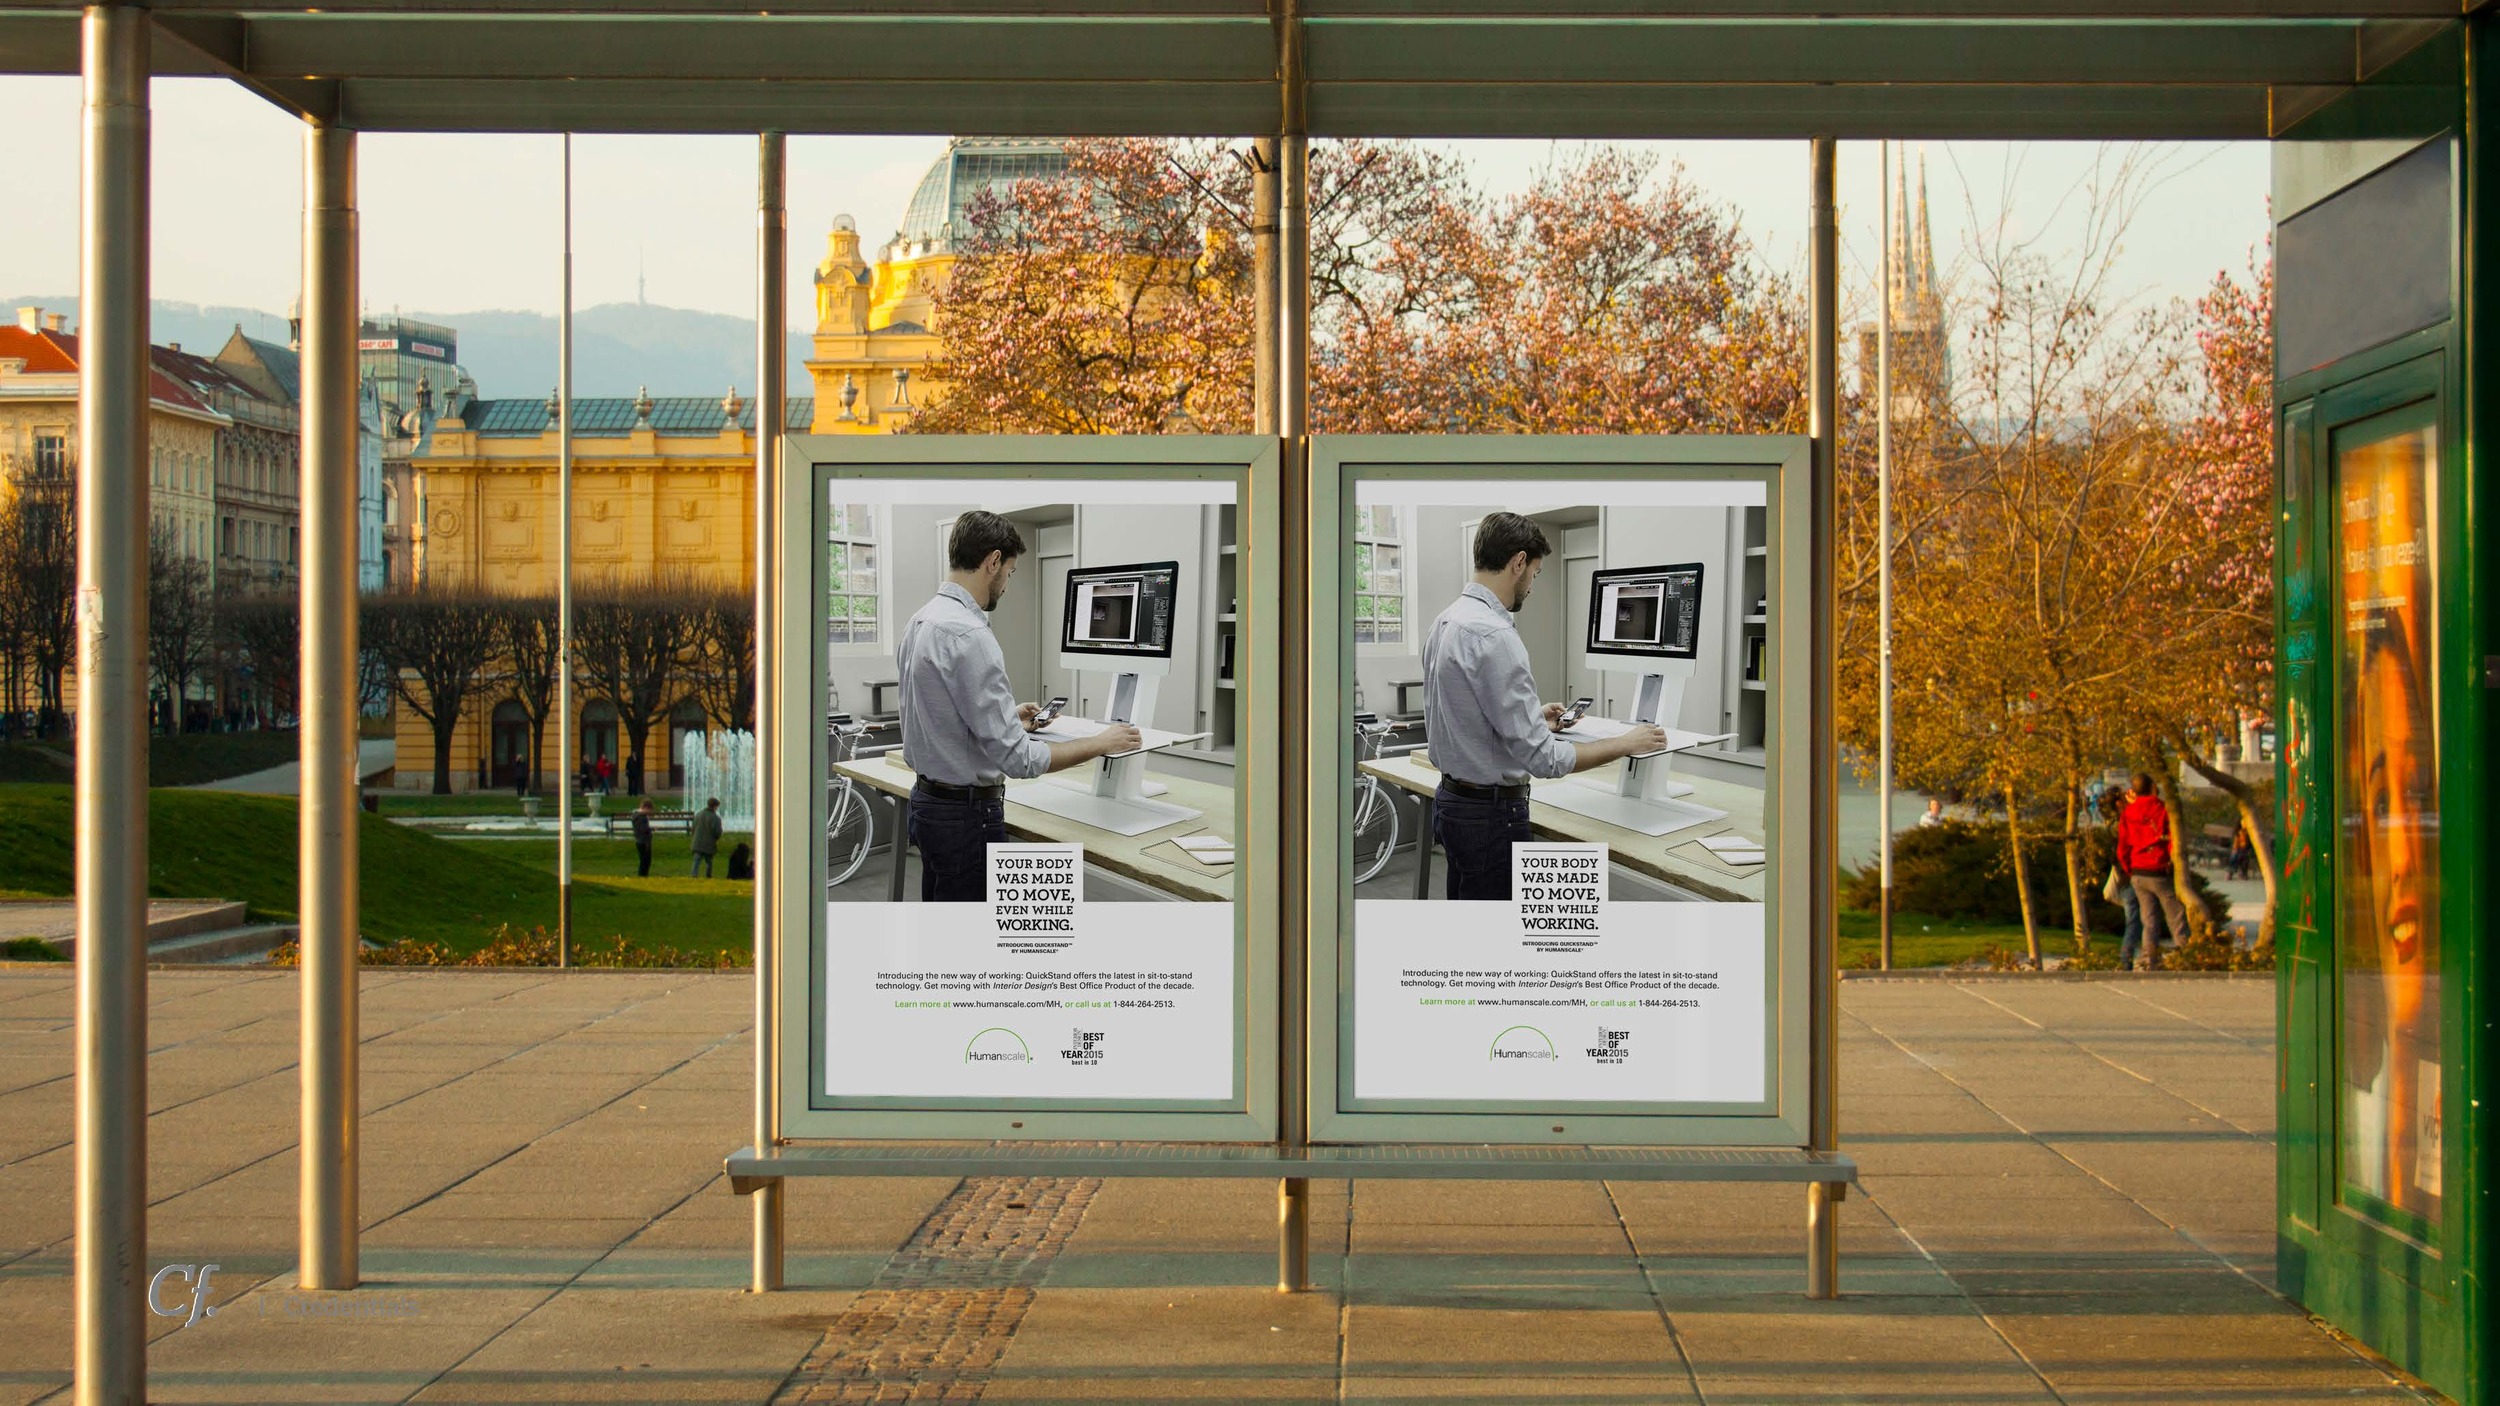 Humanscale-QuickStand-ad-campaign.jpg